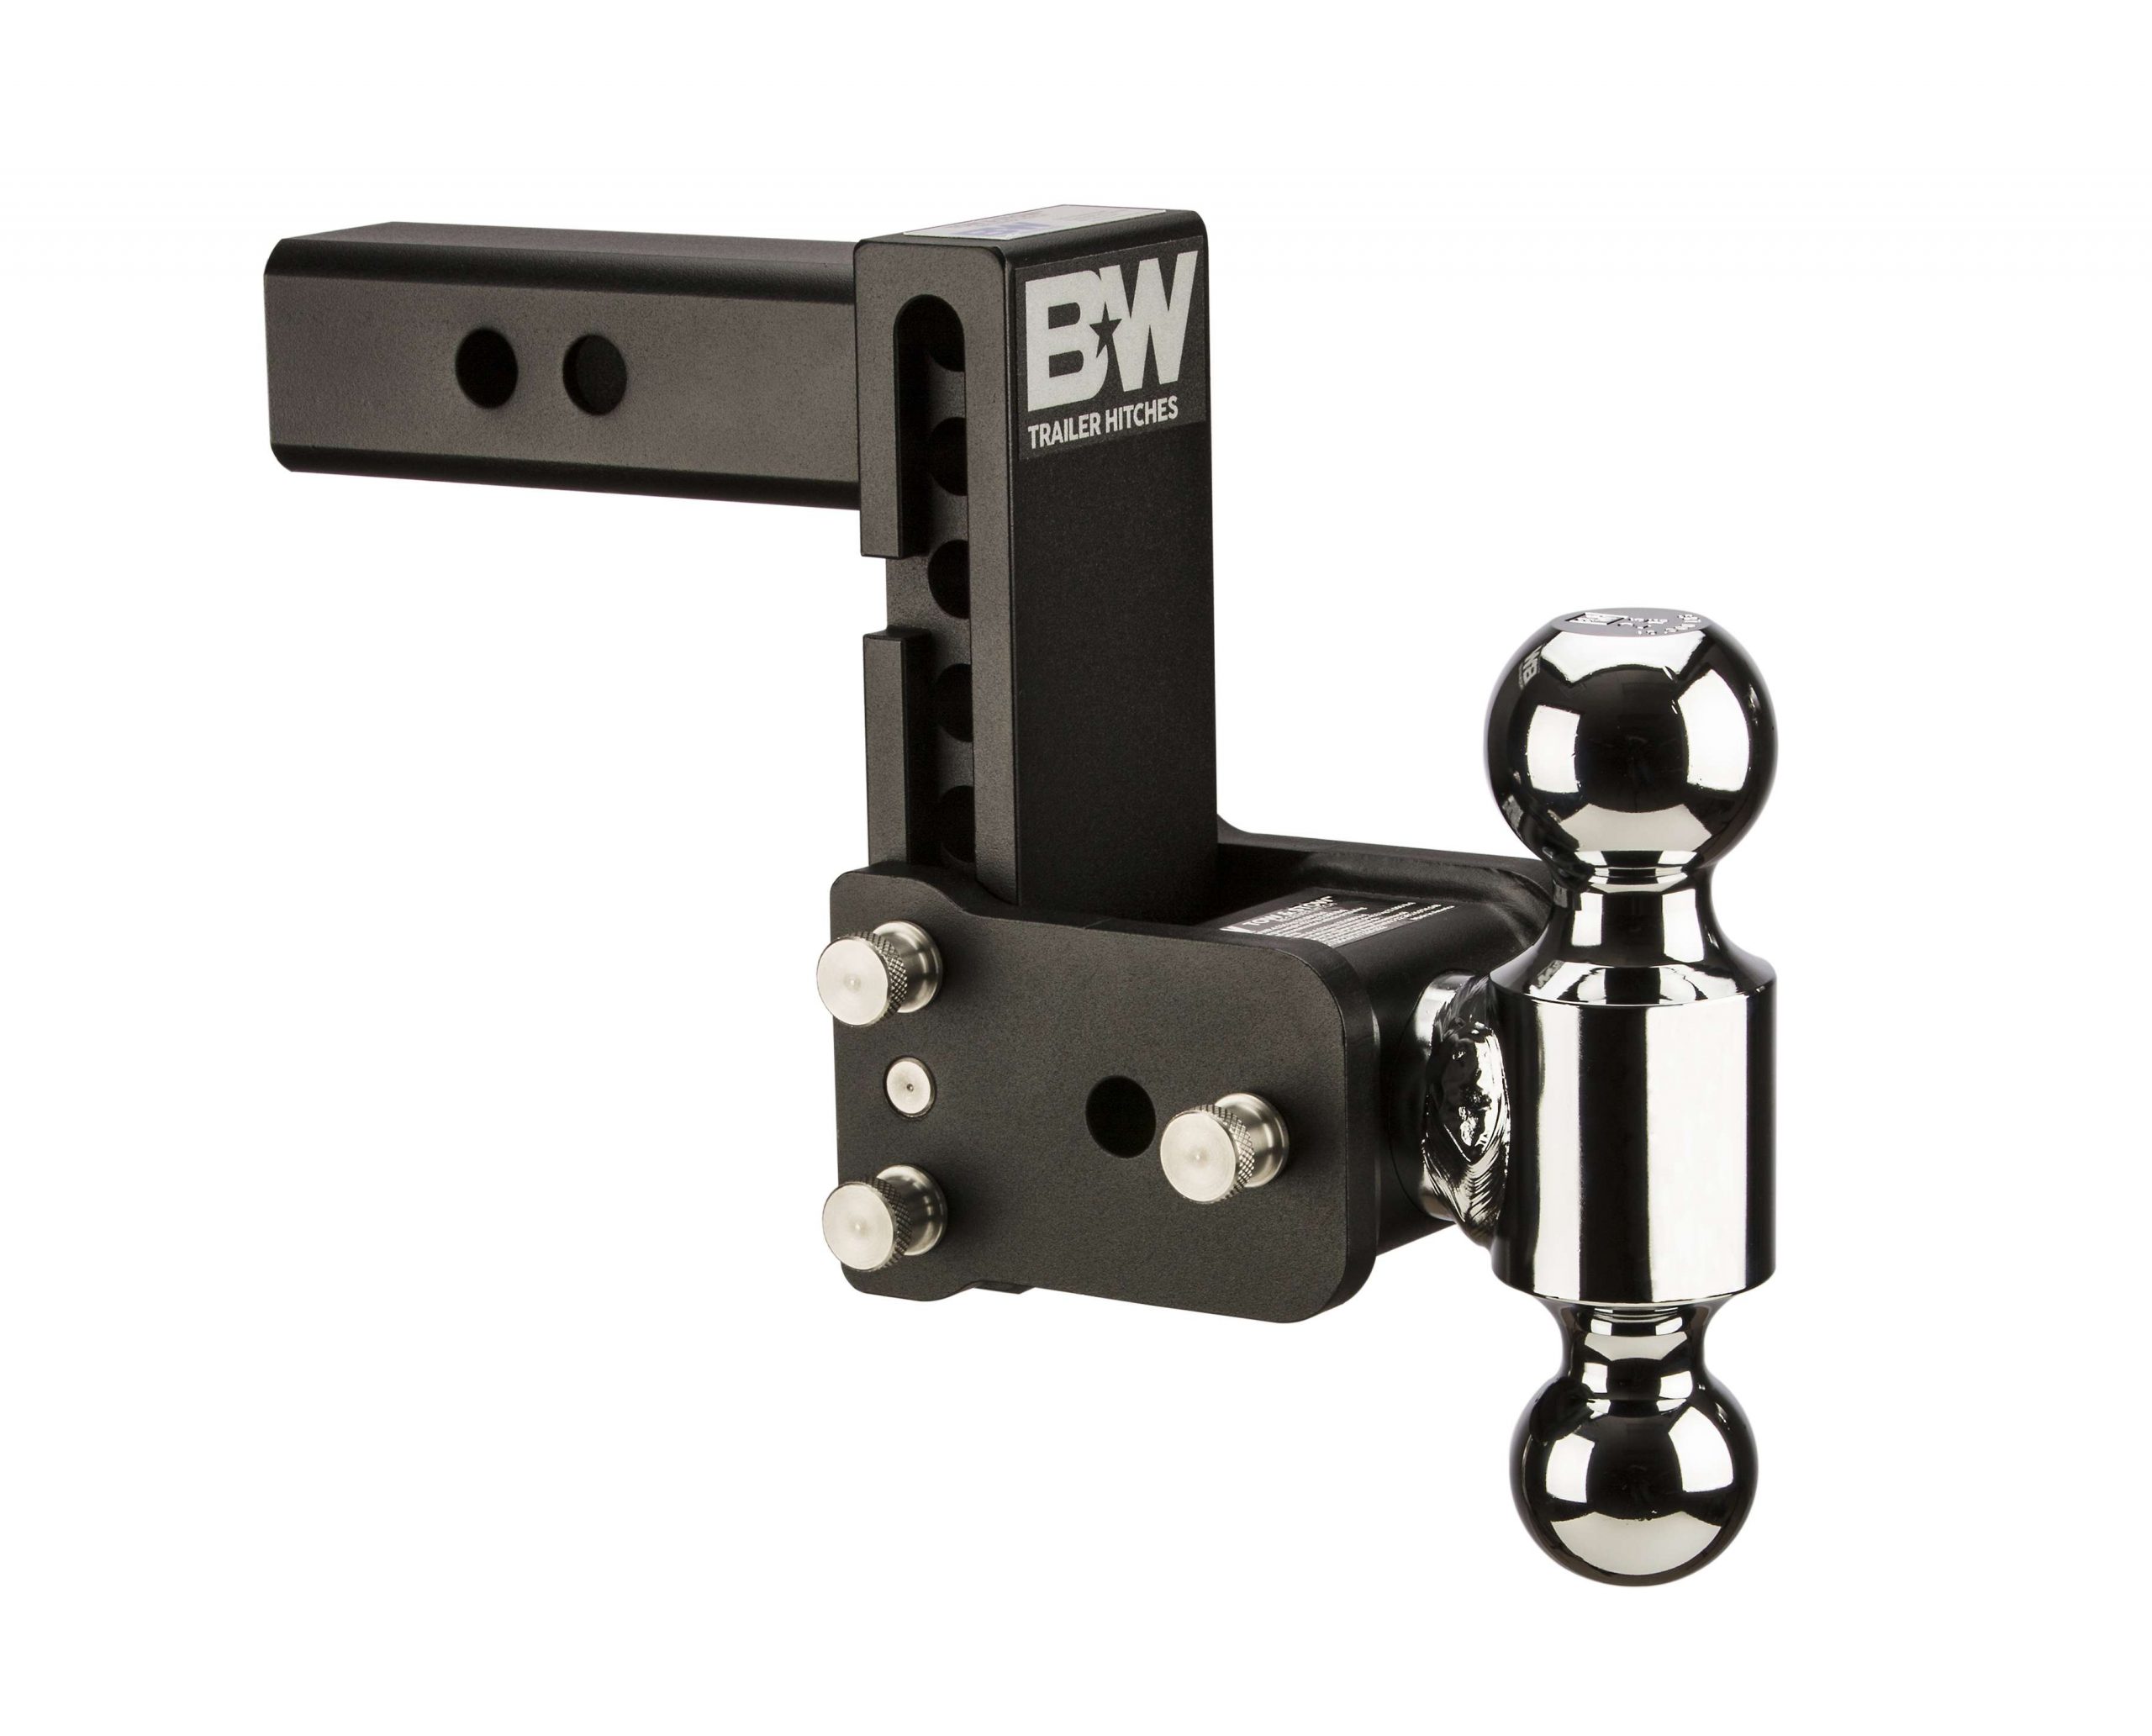 The Tow & Stow Adjustable Ball Mount is the only trailer hitch for the serious outdoorsman. Whether youâre pulling your boat to the lake, or a camper to the mountains, the Tow & Stow has you covered. It is adjustable in height for level towing, features multiple ball sizes and stows behind the bumper when not in use. Solid steel construction. Available in black, chrome or BrowningÂ®. B&W Trailer Hitches are proudly American Made.